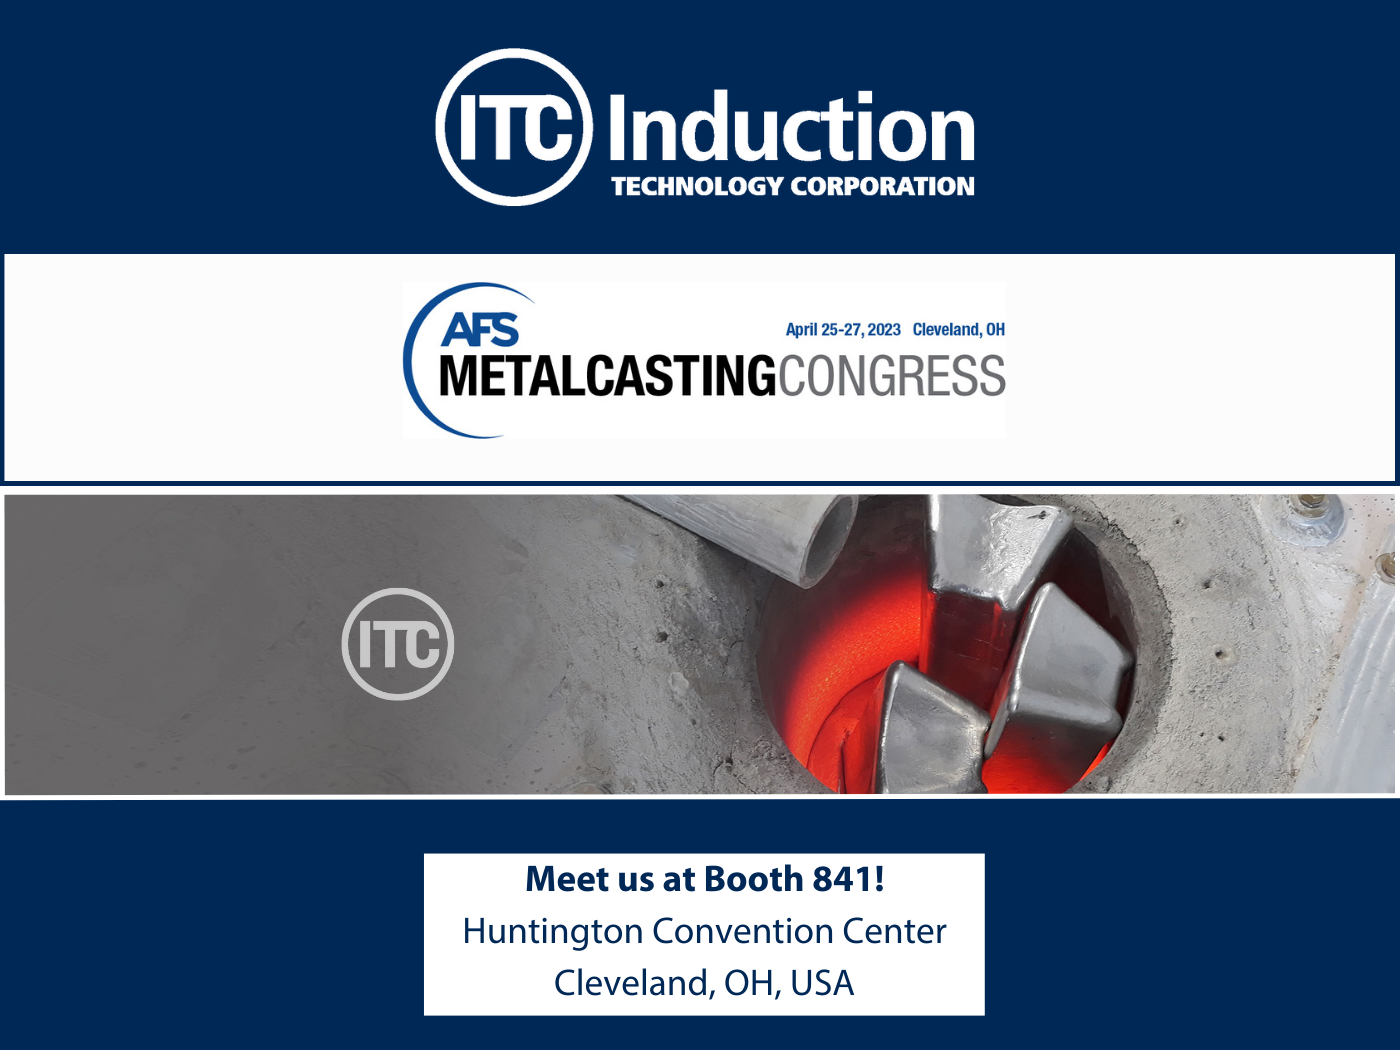 ITC will be Exhibiting at Metalcasting Congress 2023